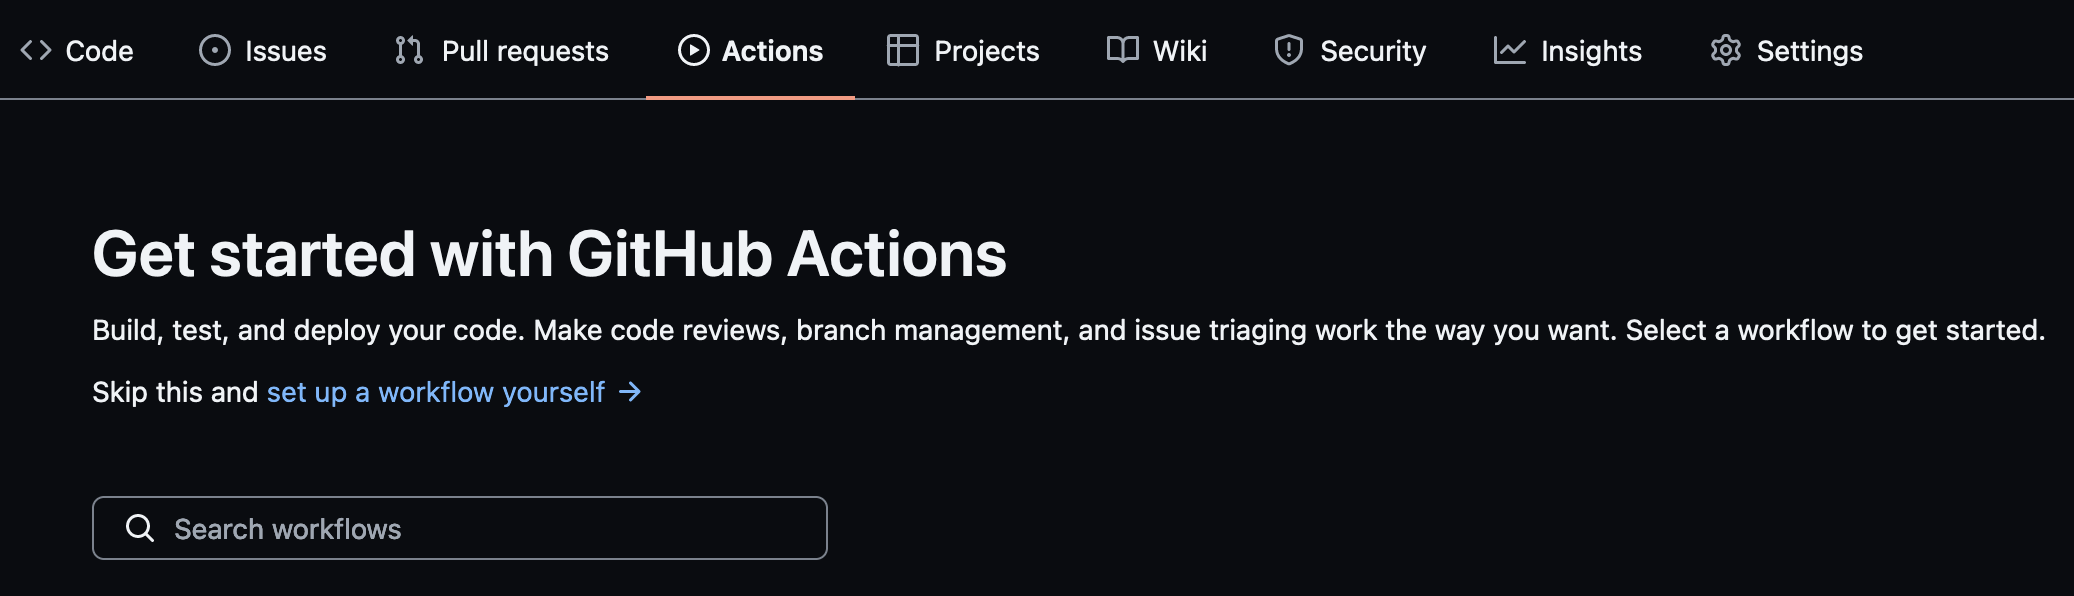 Get Started with Github Actions